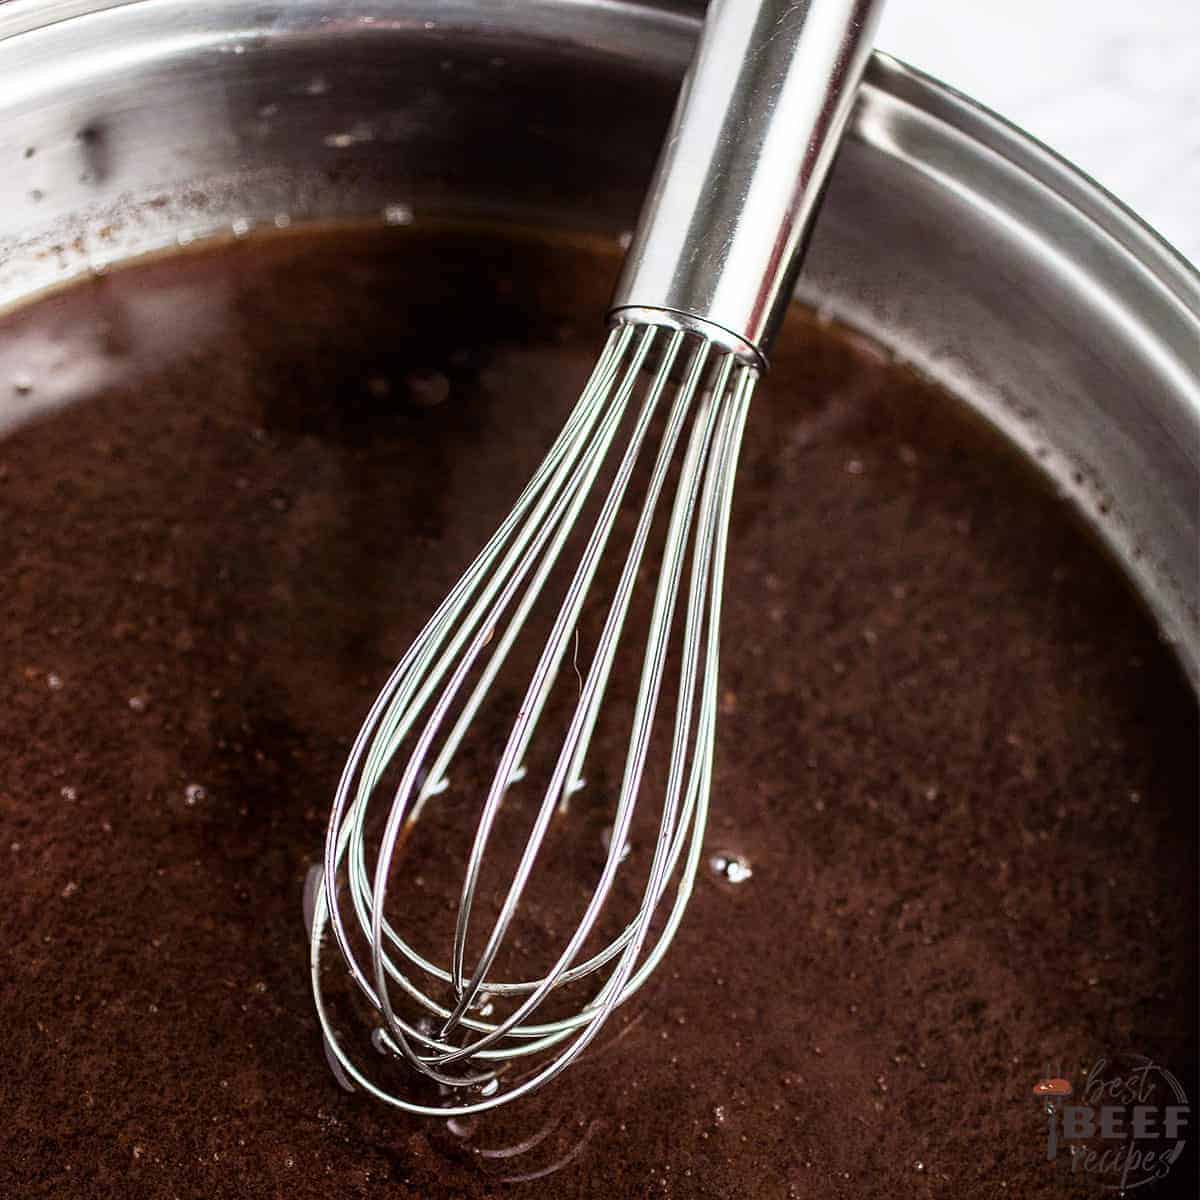 whisking au jus sauce in a steel container